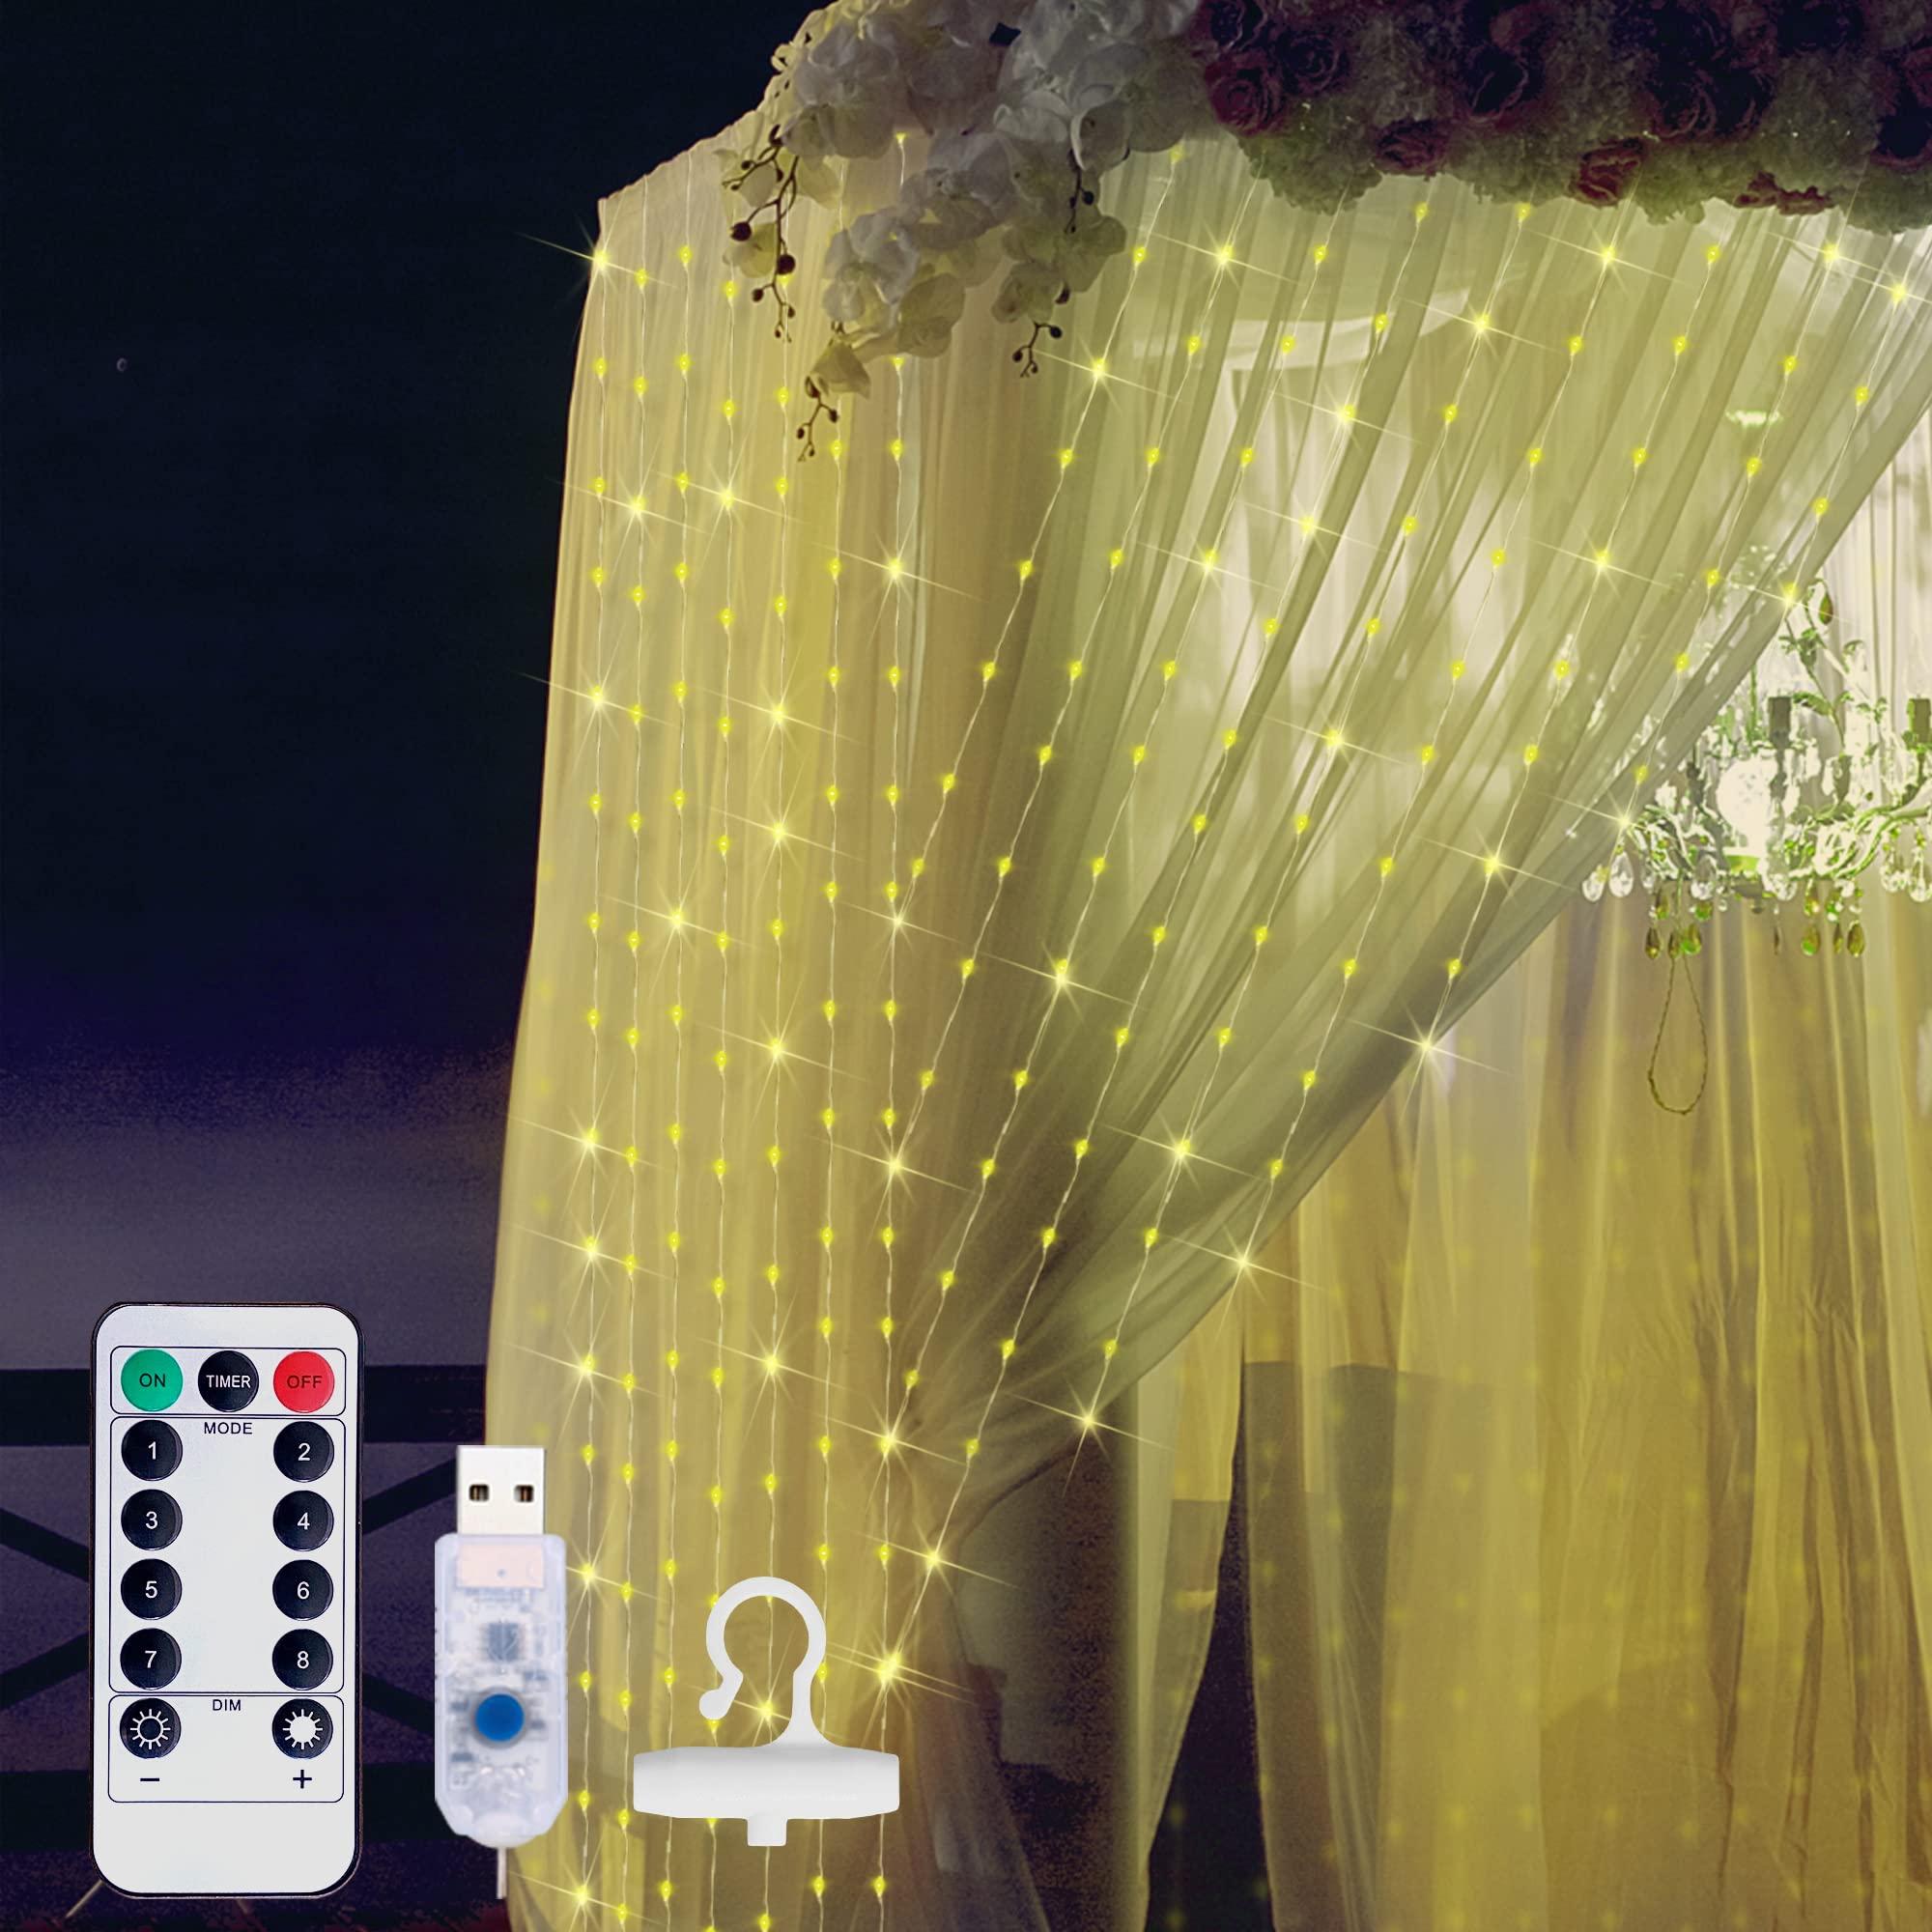 Curtain Lights with Remote Control 300LED Fairy Light 8 Lighting Modes USB Powered for Bedroom Garden Party Wedding Christmas, Ideale Gift for Family Friends Warm White(3 * 3 Meters)